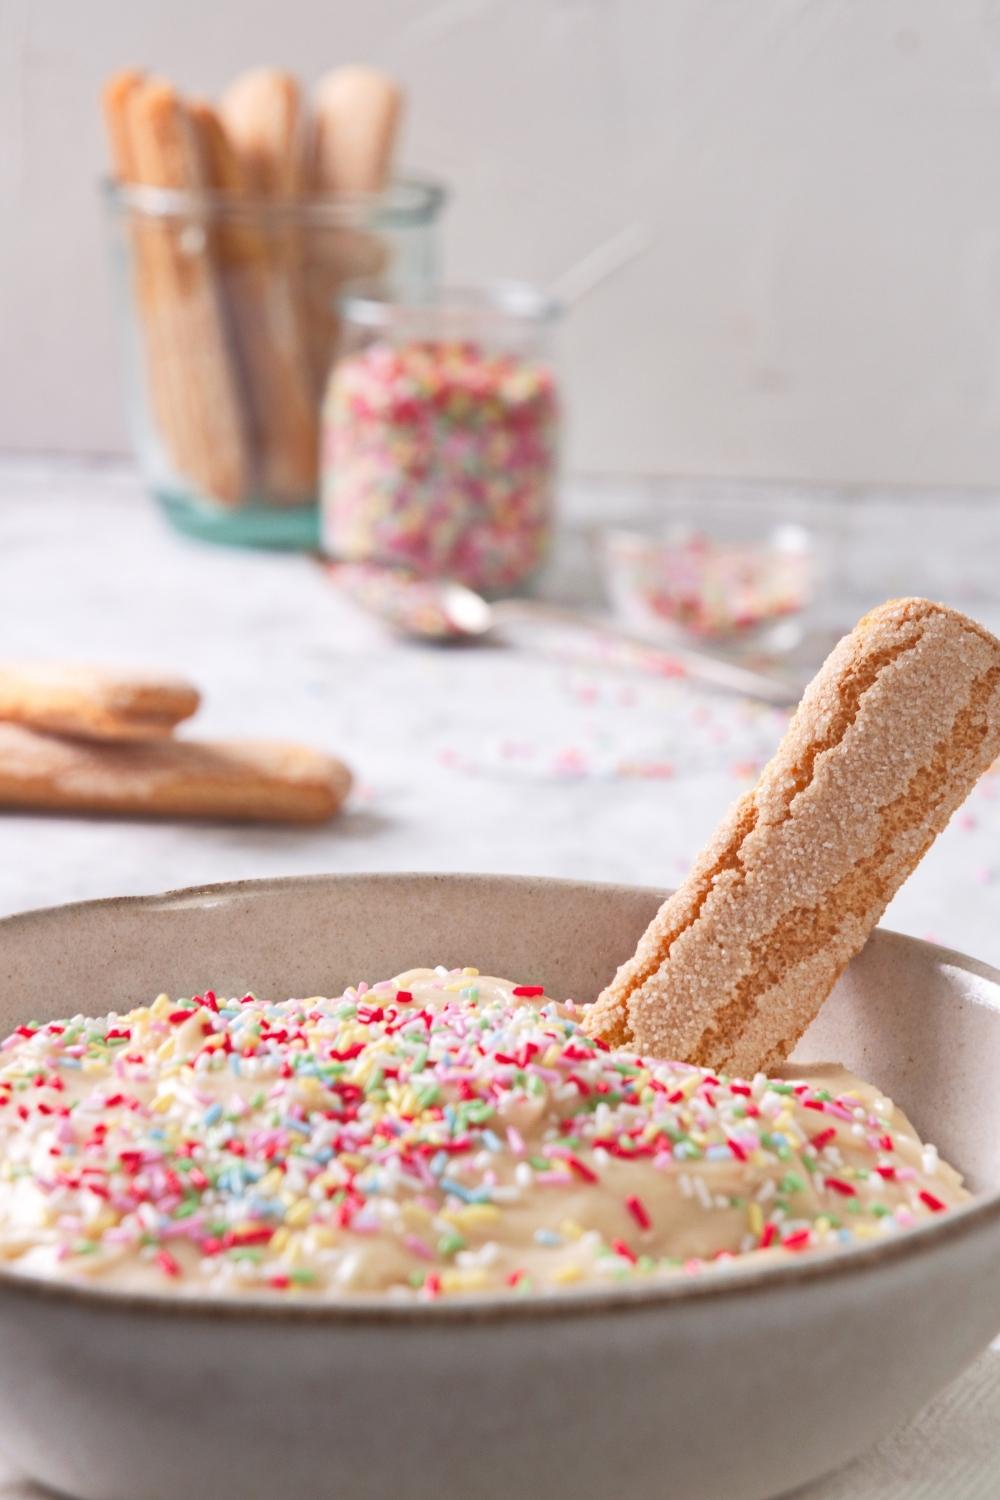 A close-up of a serving bowl containing homemade Dunkaroo dip topped with rainbow sprinkles with a shortbread cookie dipped in it.